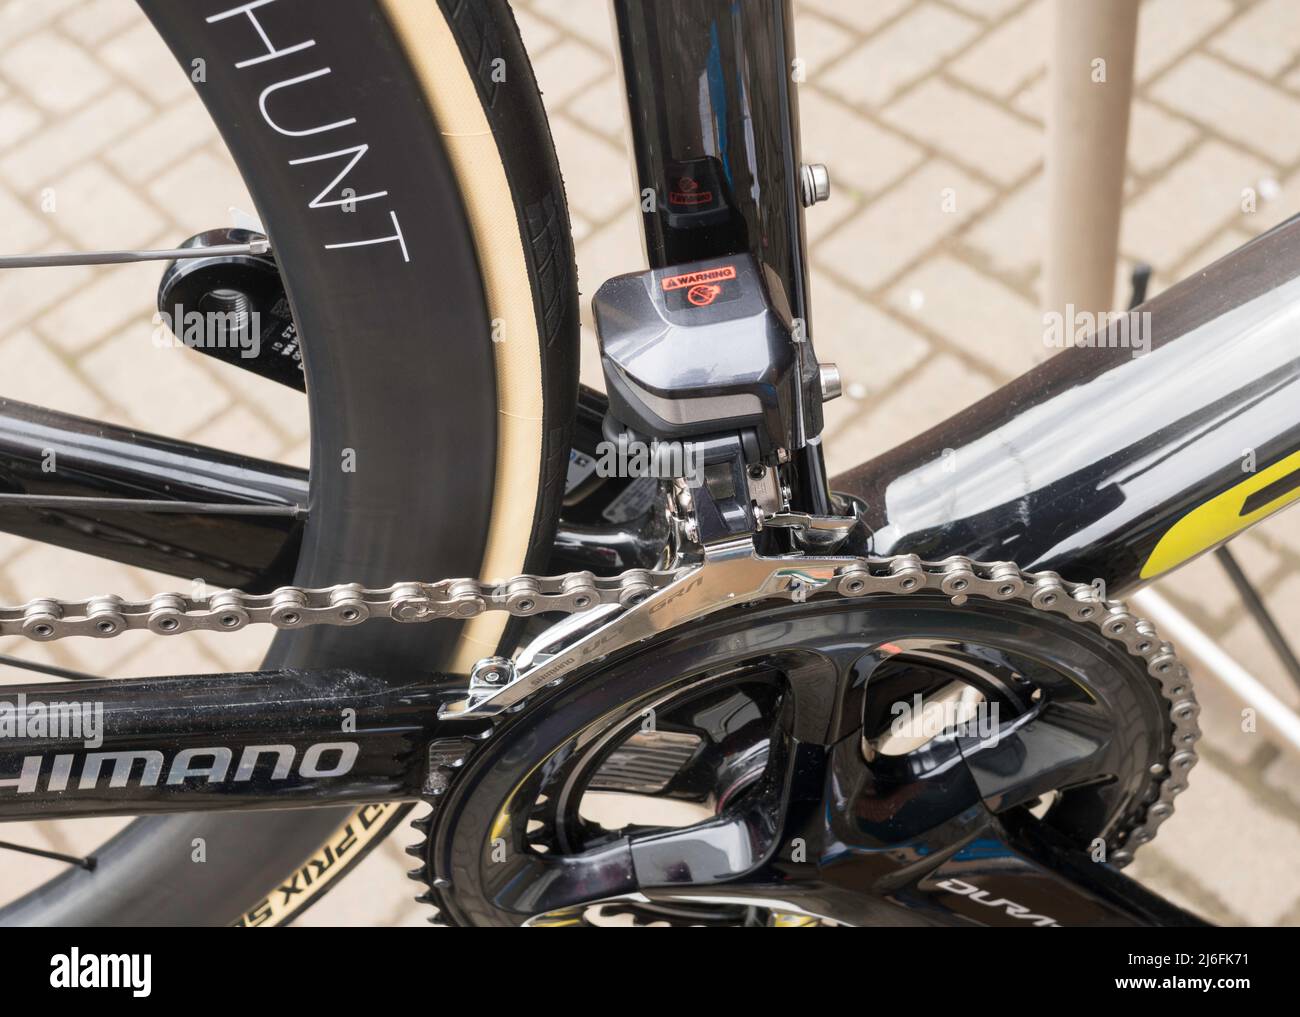 Shimano Ultegra electrically operated or electronic front derailleur on a road bike. Stock Photo